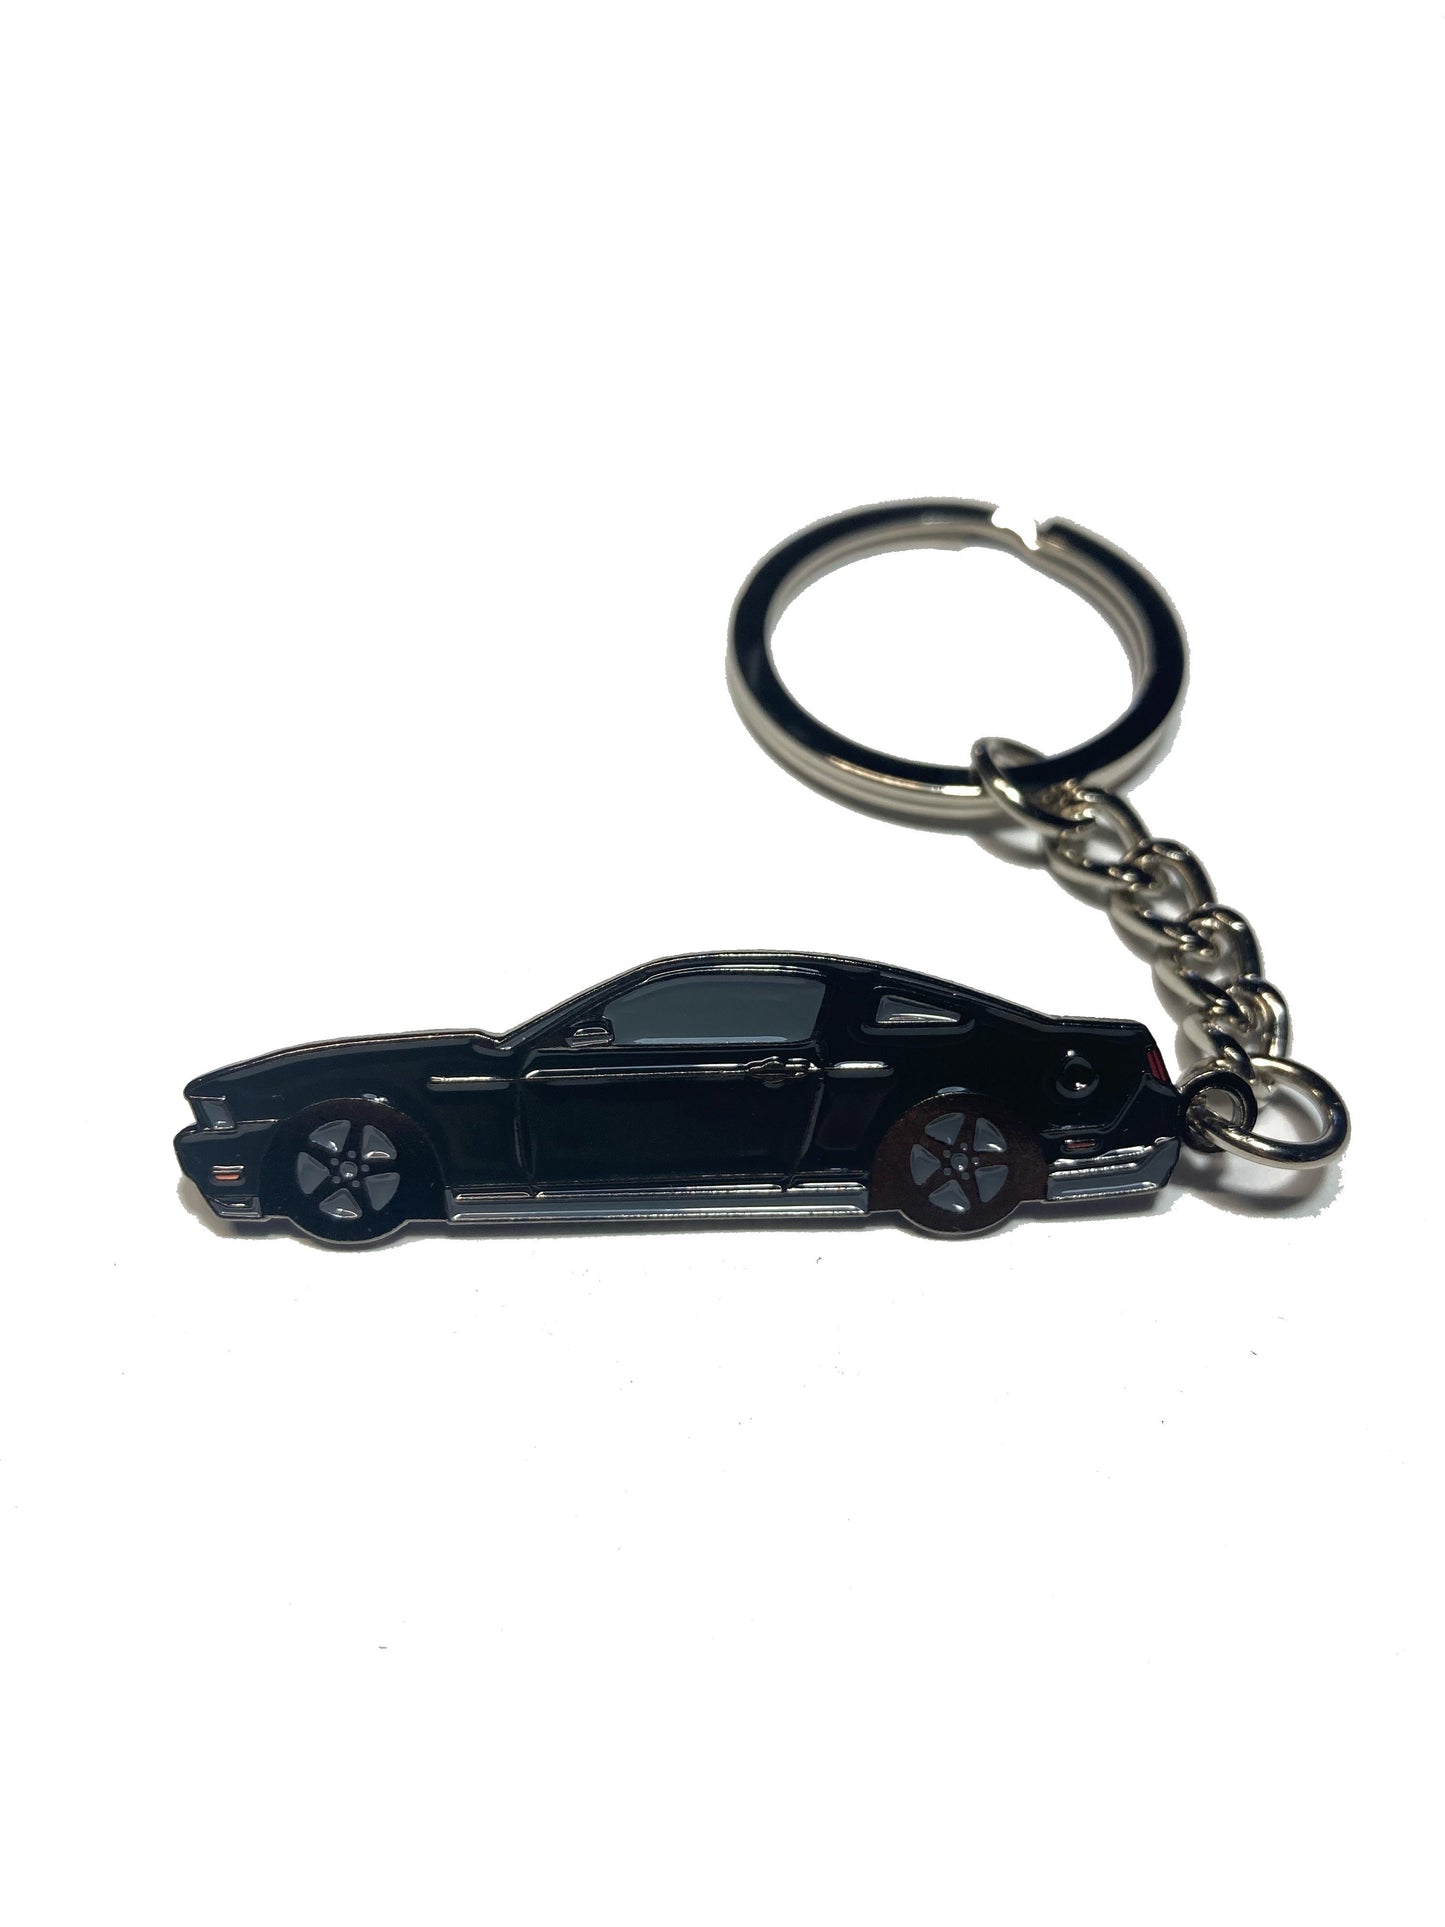 Mustang S197 (2010-2012) Keychains